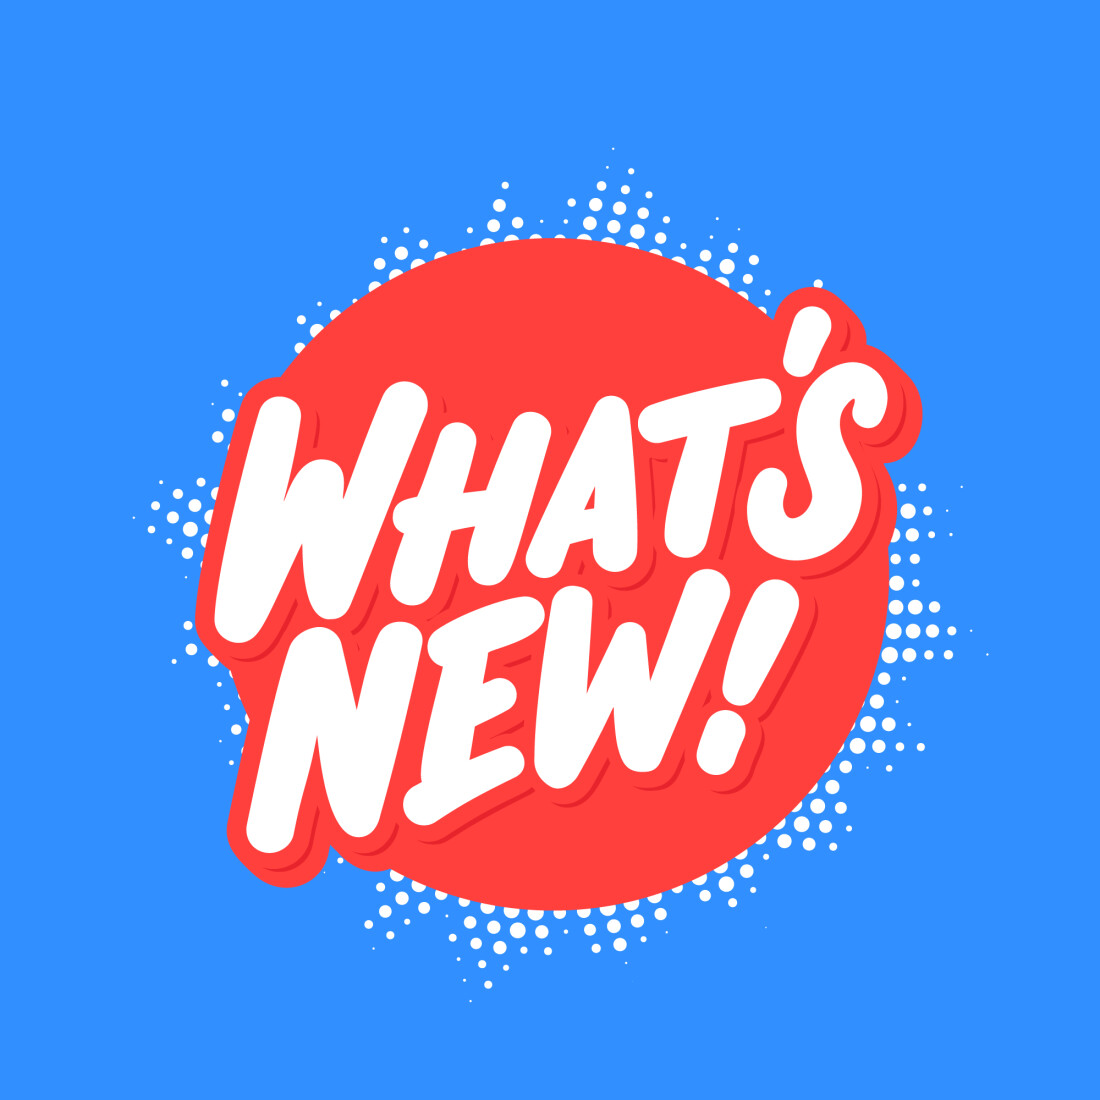 WHAT’S NEW! In white letters backed by a red circle surrounded by a blue background